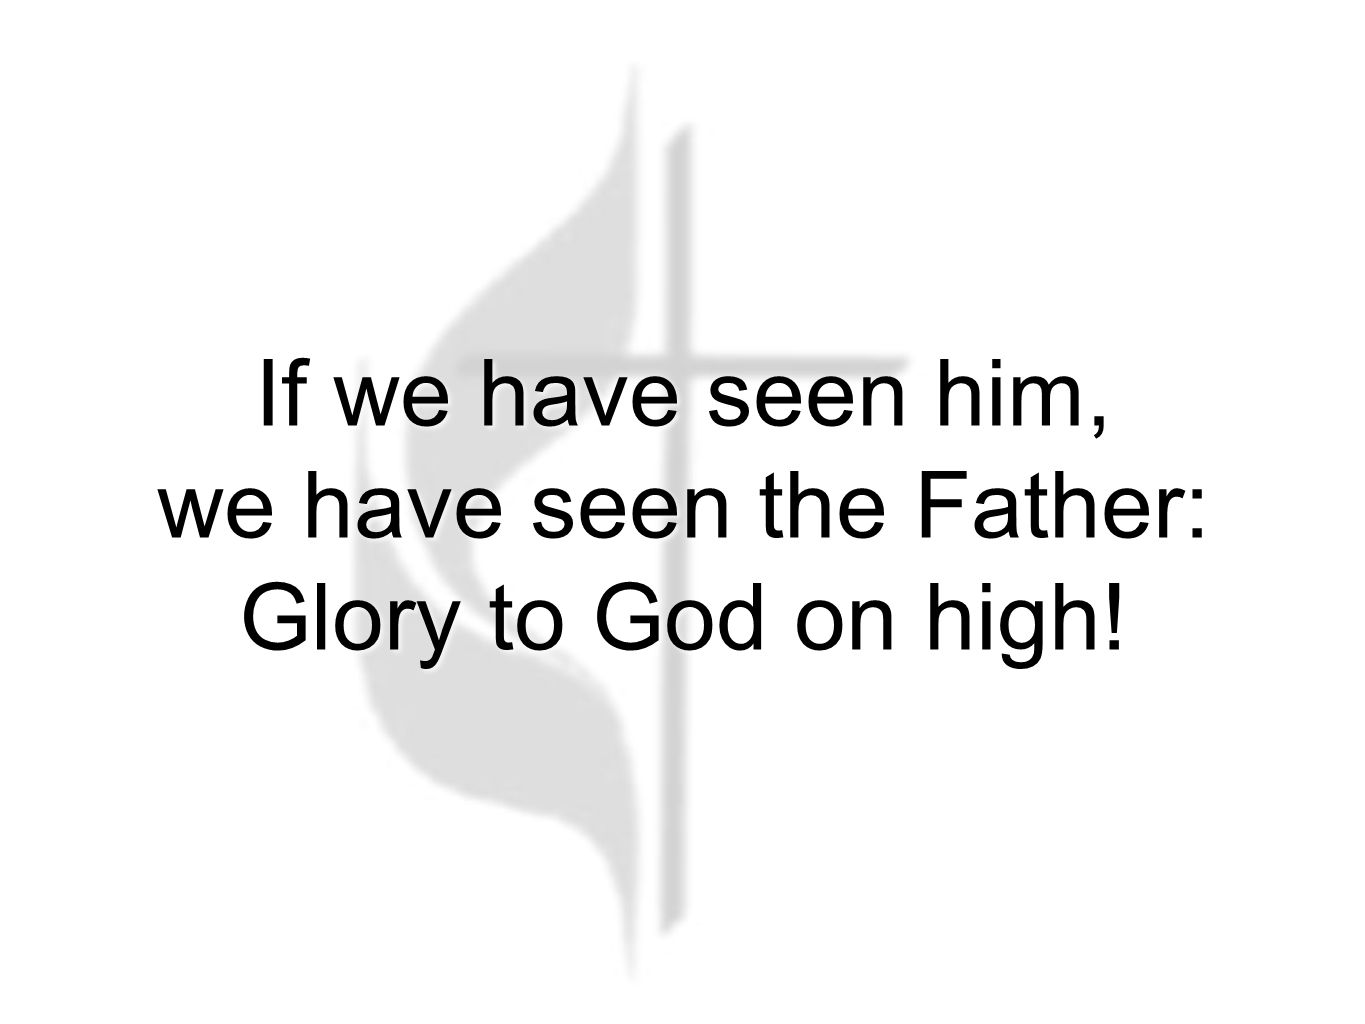 If we have seen him, we have seen the Father: Glory to God on high!